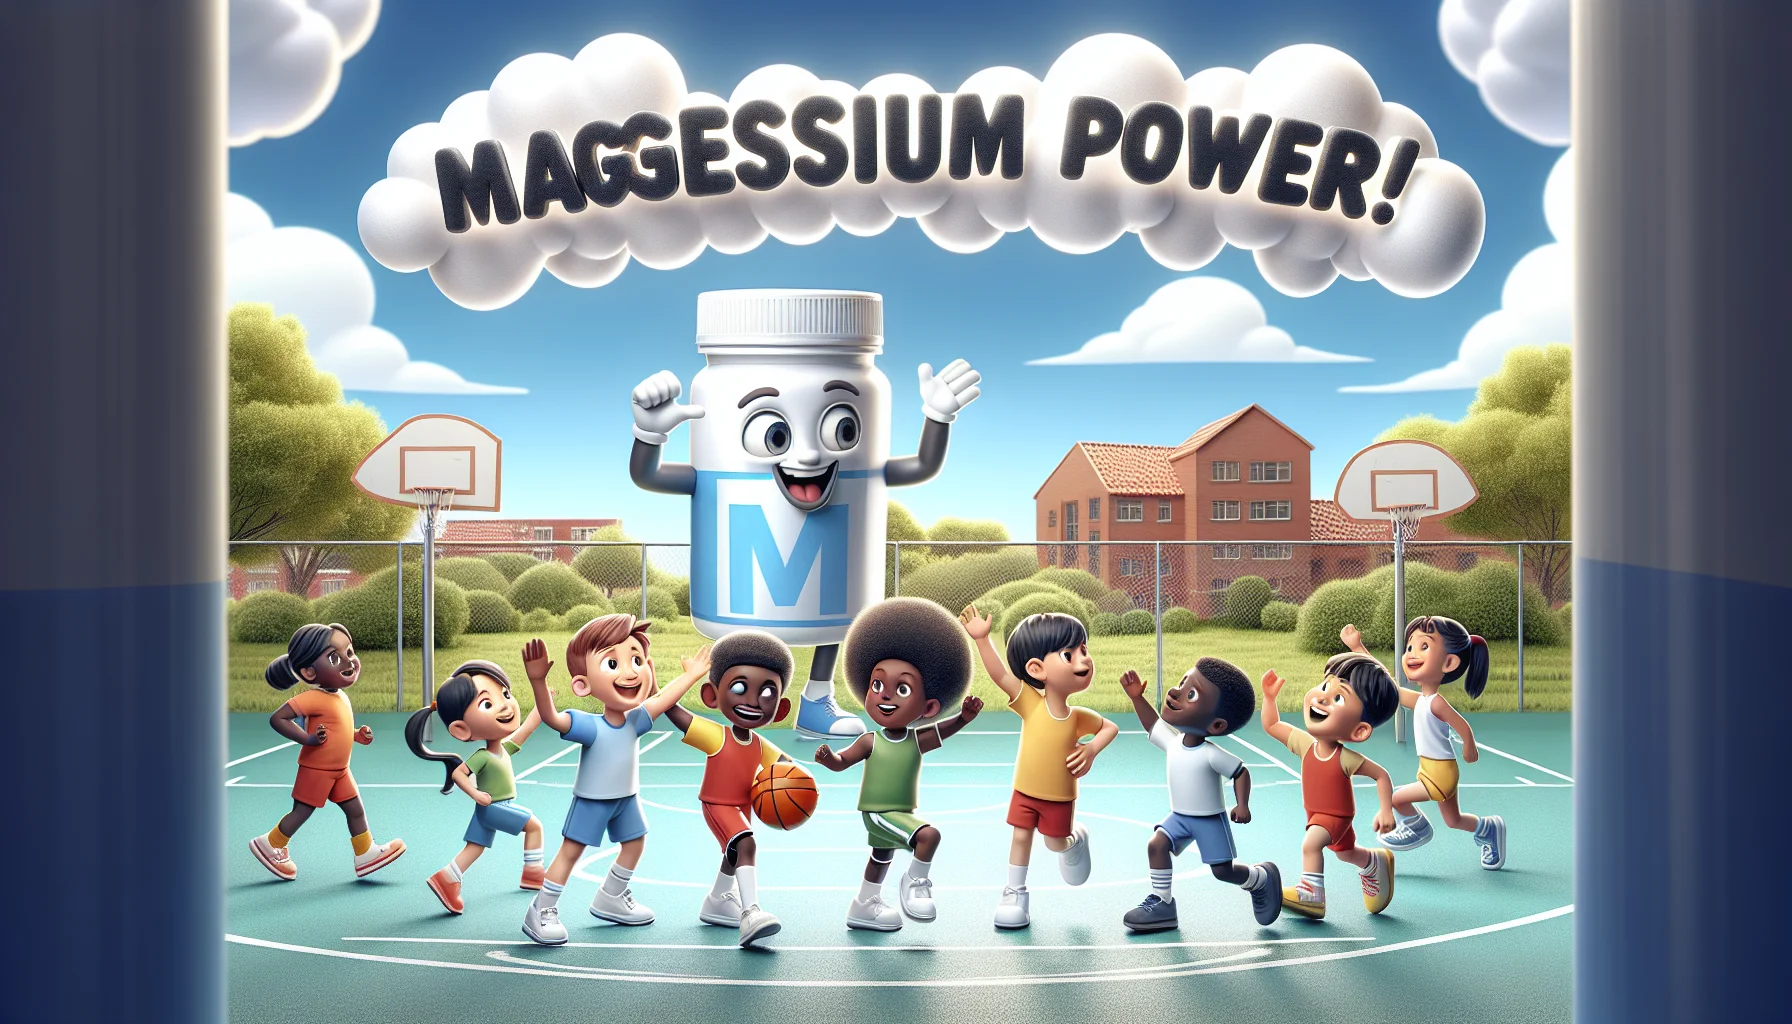 Generate a vivid and entertaining image depicting a scenario where kids are benefitting from magnesium supplements for their sports activities. The scene unfolds on a bright, sunny day with kids of different descents, such as Caucasian, Black, Hispanic, Middle-Eastern, and South Asian, all engaged in a variety of sports such as basketball, soccer, and tennis. The magnesium supplements assumed a funny, animated character, high-fiving the kids and cheering them on. The clouds subtly formed a wording 'Magnesium Power!' adding an inviting tone to the scene, depicting the importance and benefits of magnesium in kids' sports performance.